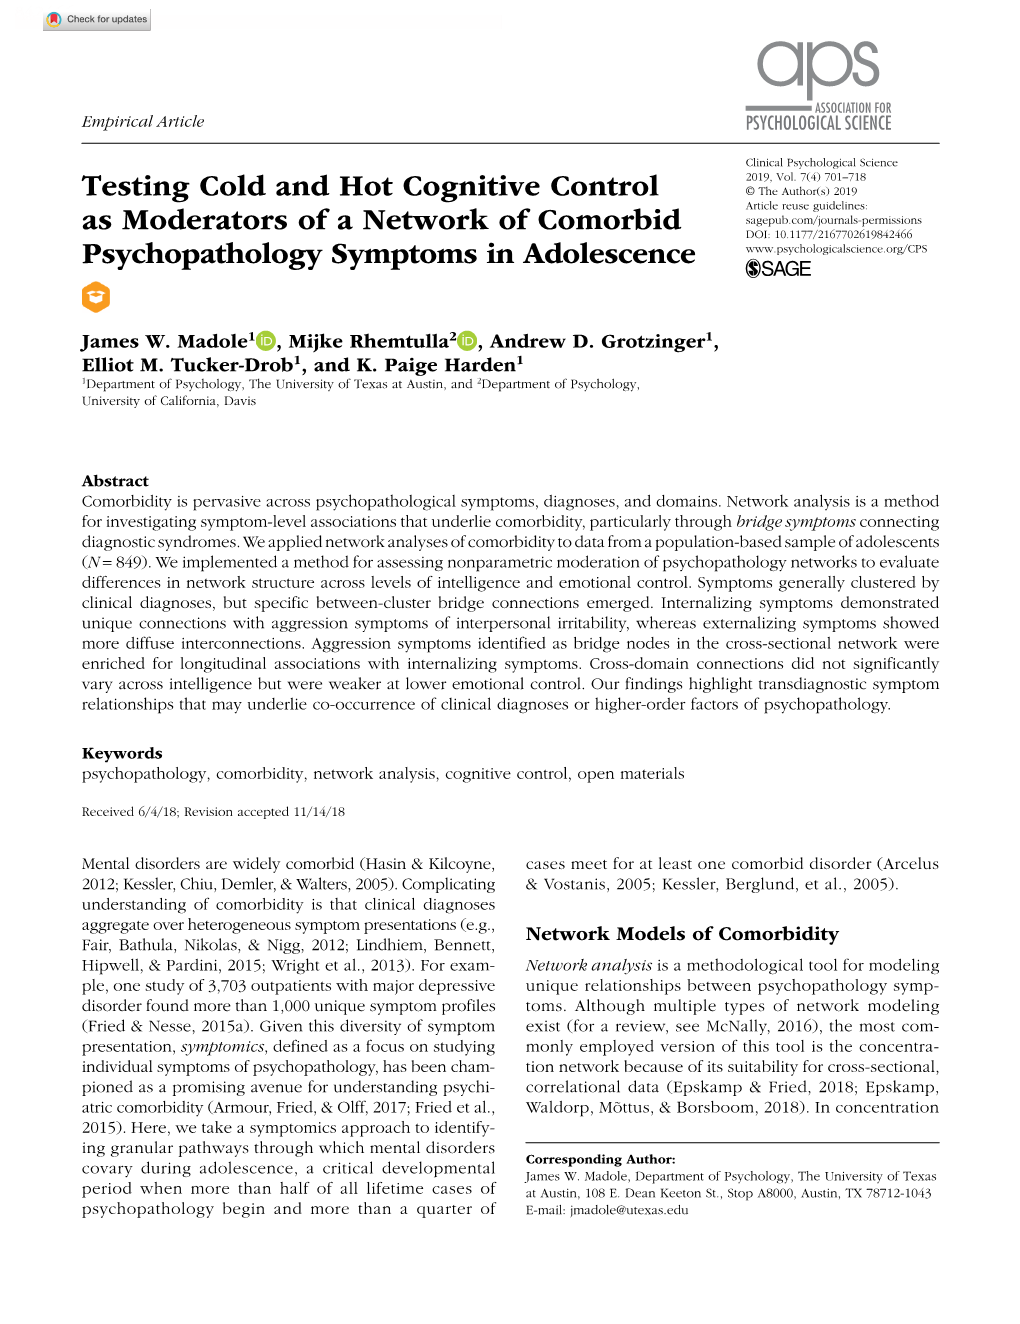 Testing Cold and Hot Cognitive Control As Moderators of a Network